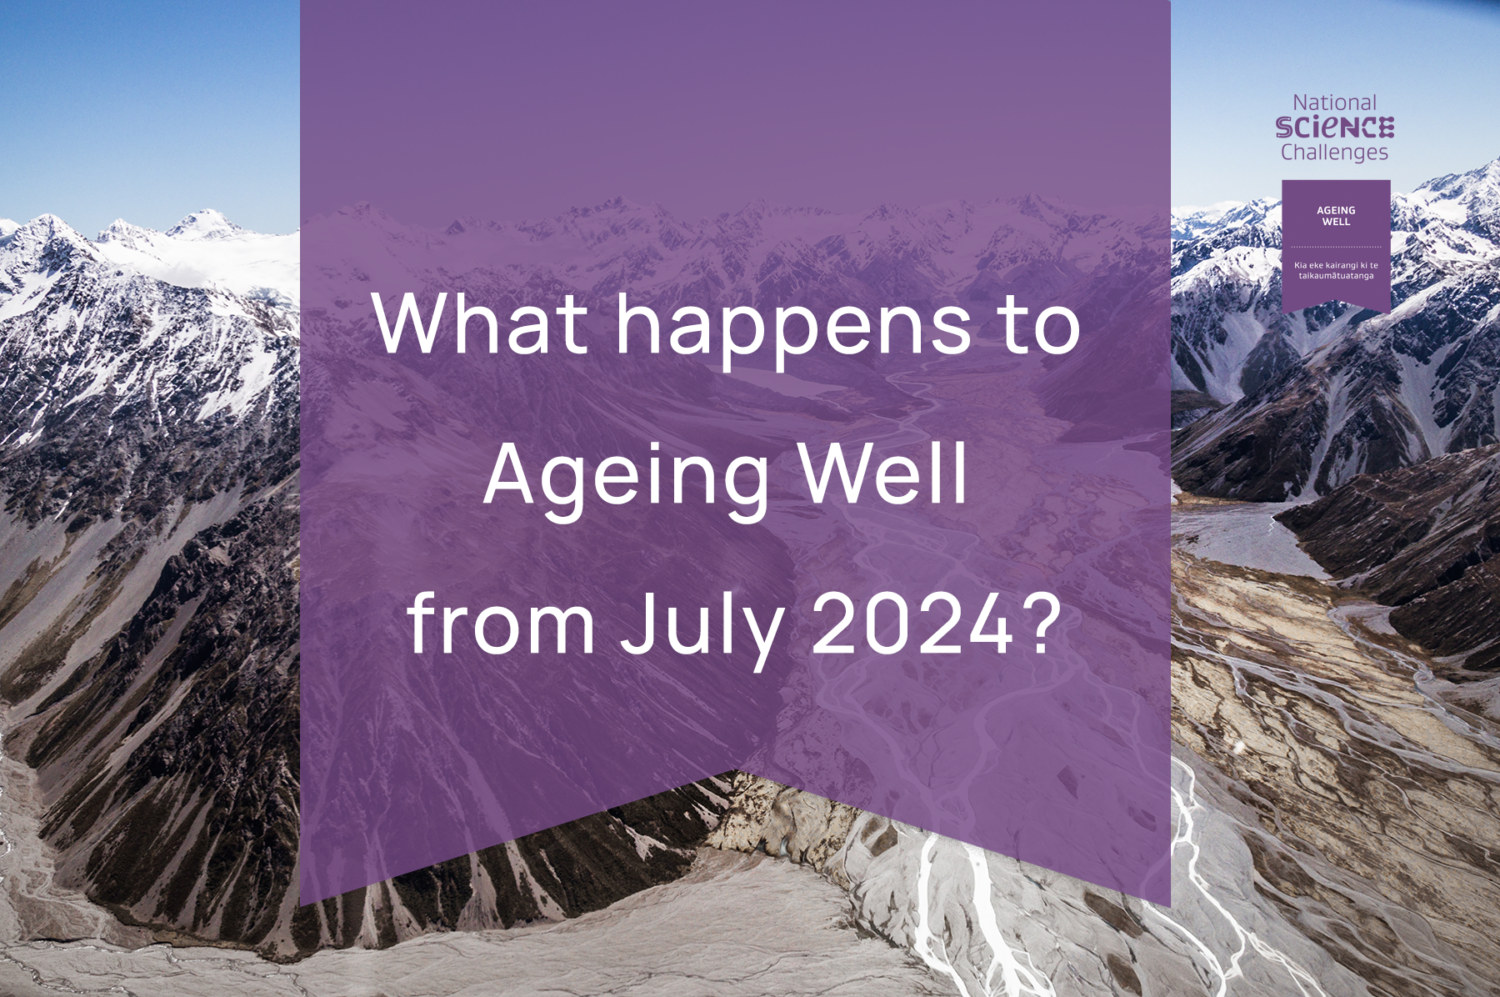 What happens to Ageing Well from July 2024?